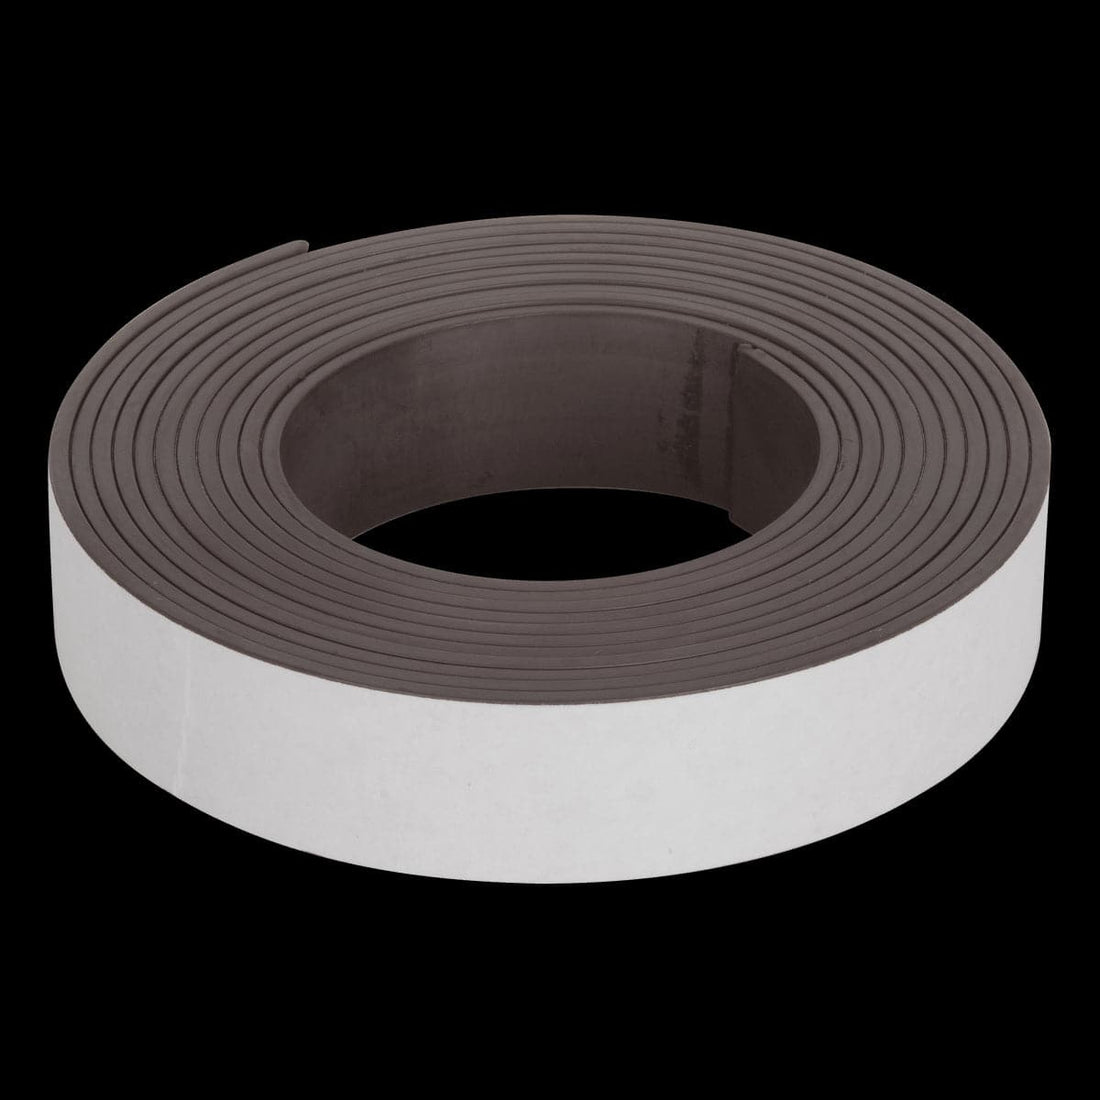 ADHESIVE MAGNETIC TAPE 20MM L 2.5M - best price from Maltashopper.com BR410007369